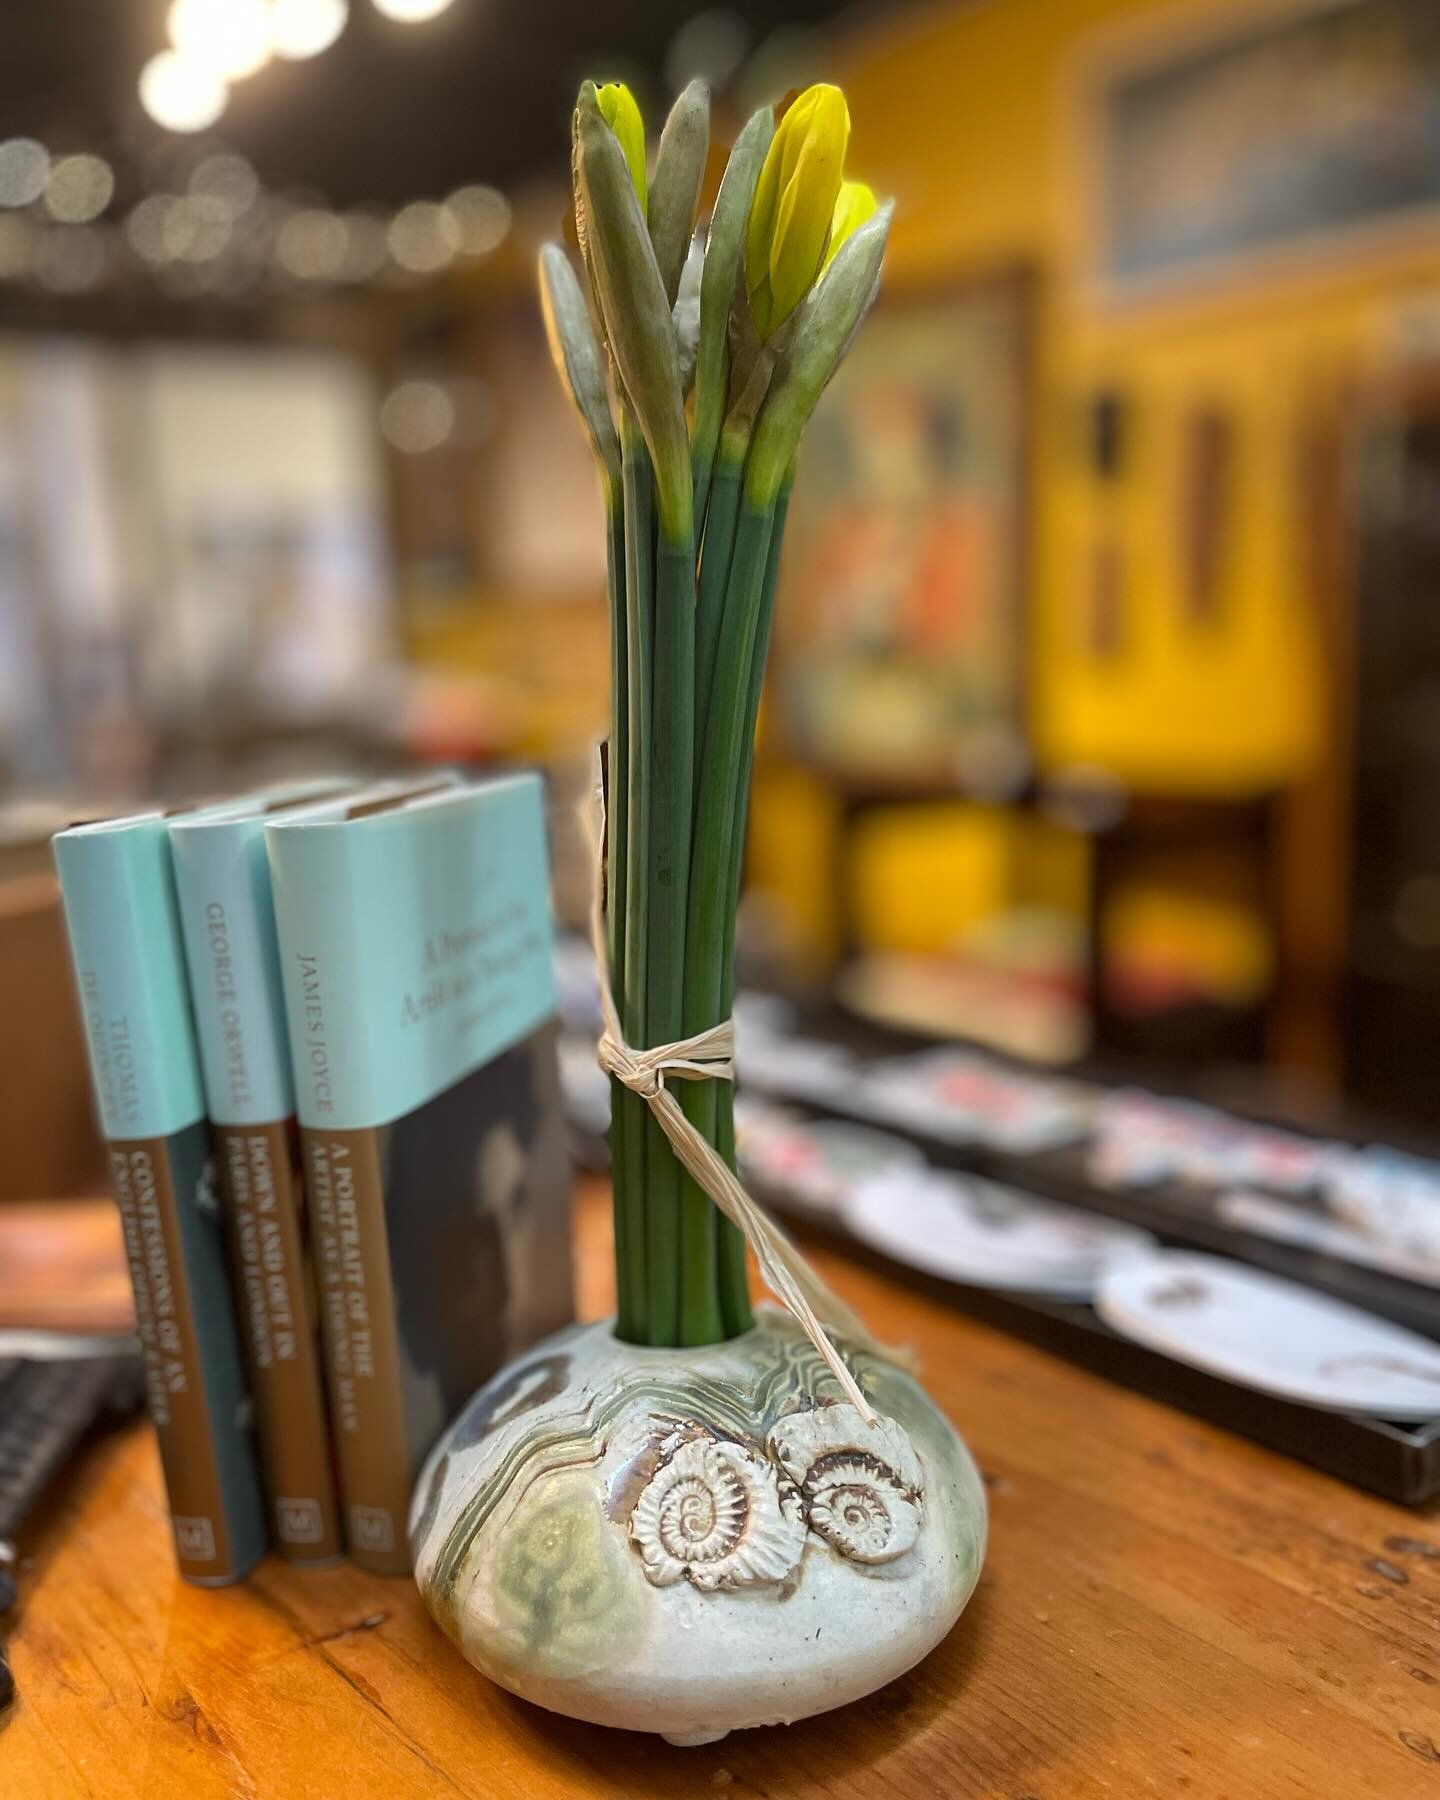 What a weekend! Thank you to everyone, and special gratitude to the very sweet Ms Bird who stopped by on Saturday to bring us a lovely little bouquet of daffodils! We have a wonderful community in Penticton and at the @cannerytradecentre #gratitude